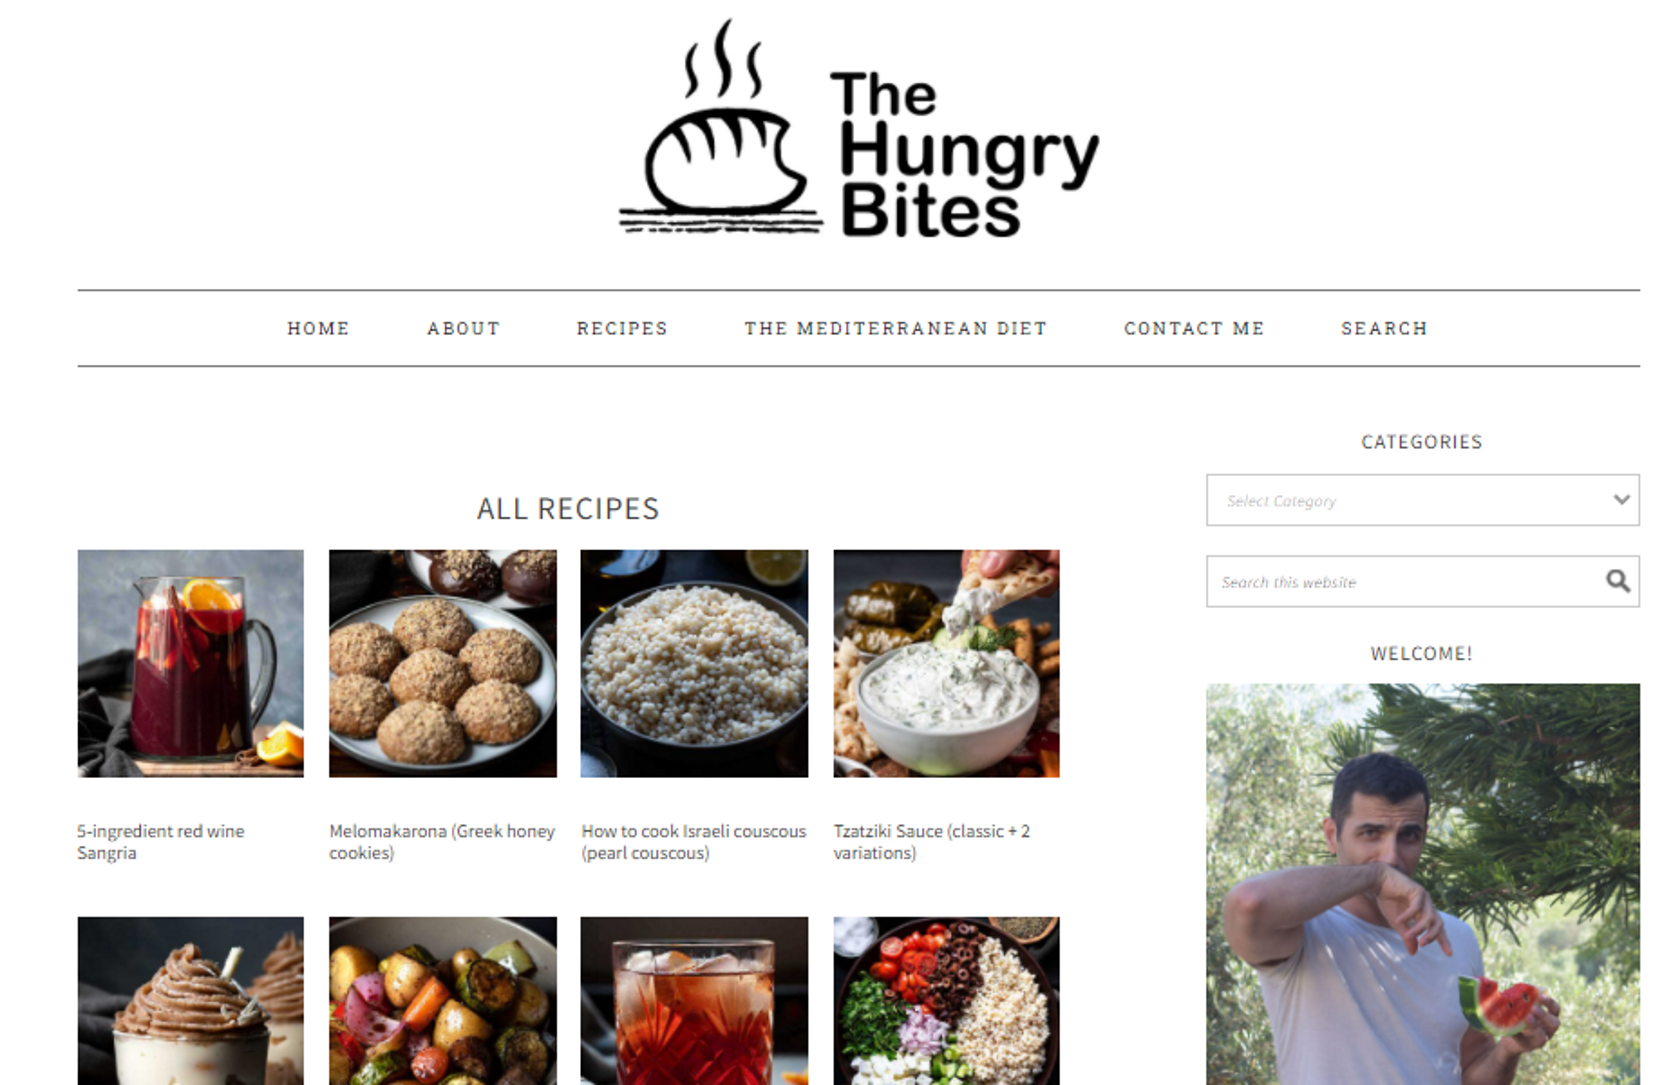 The Hungry Bites Mediterranean diet blog recipes webpage